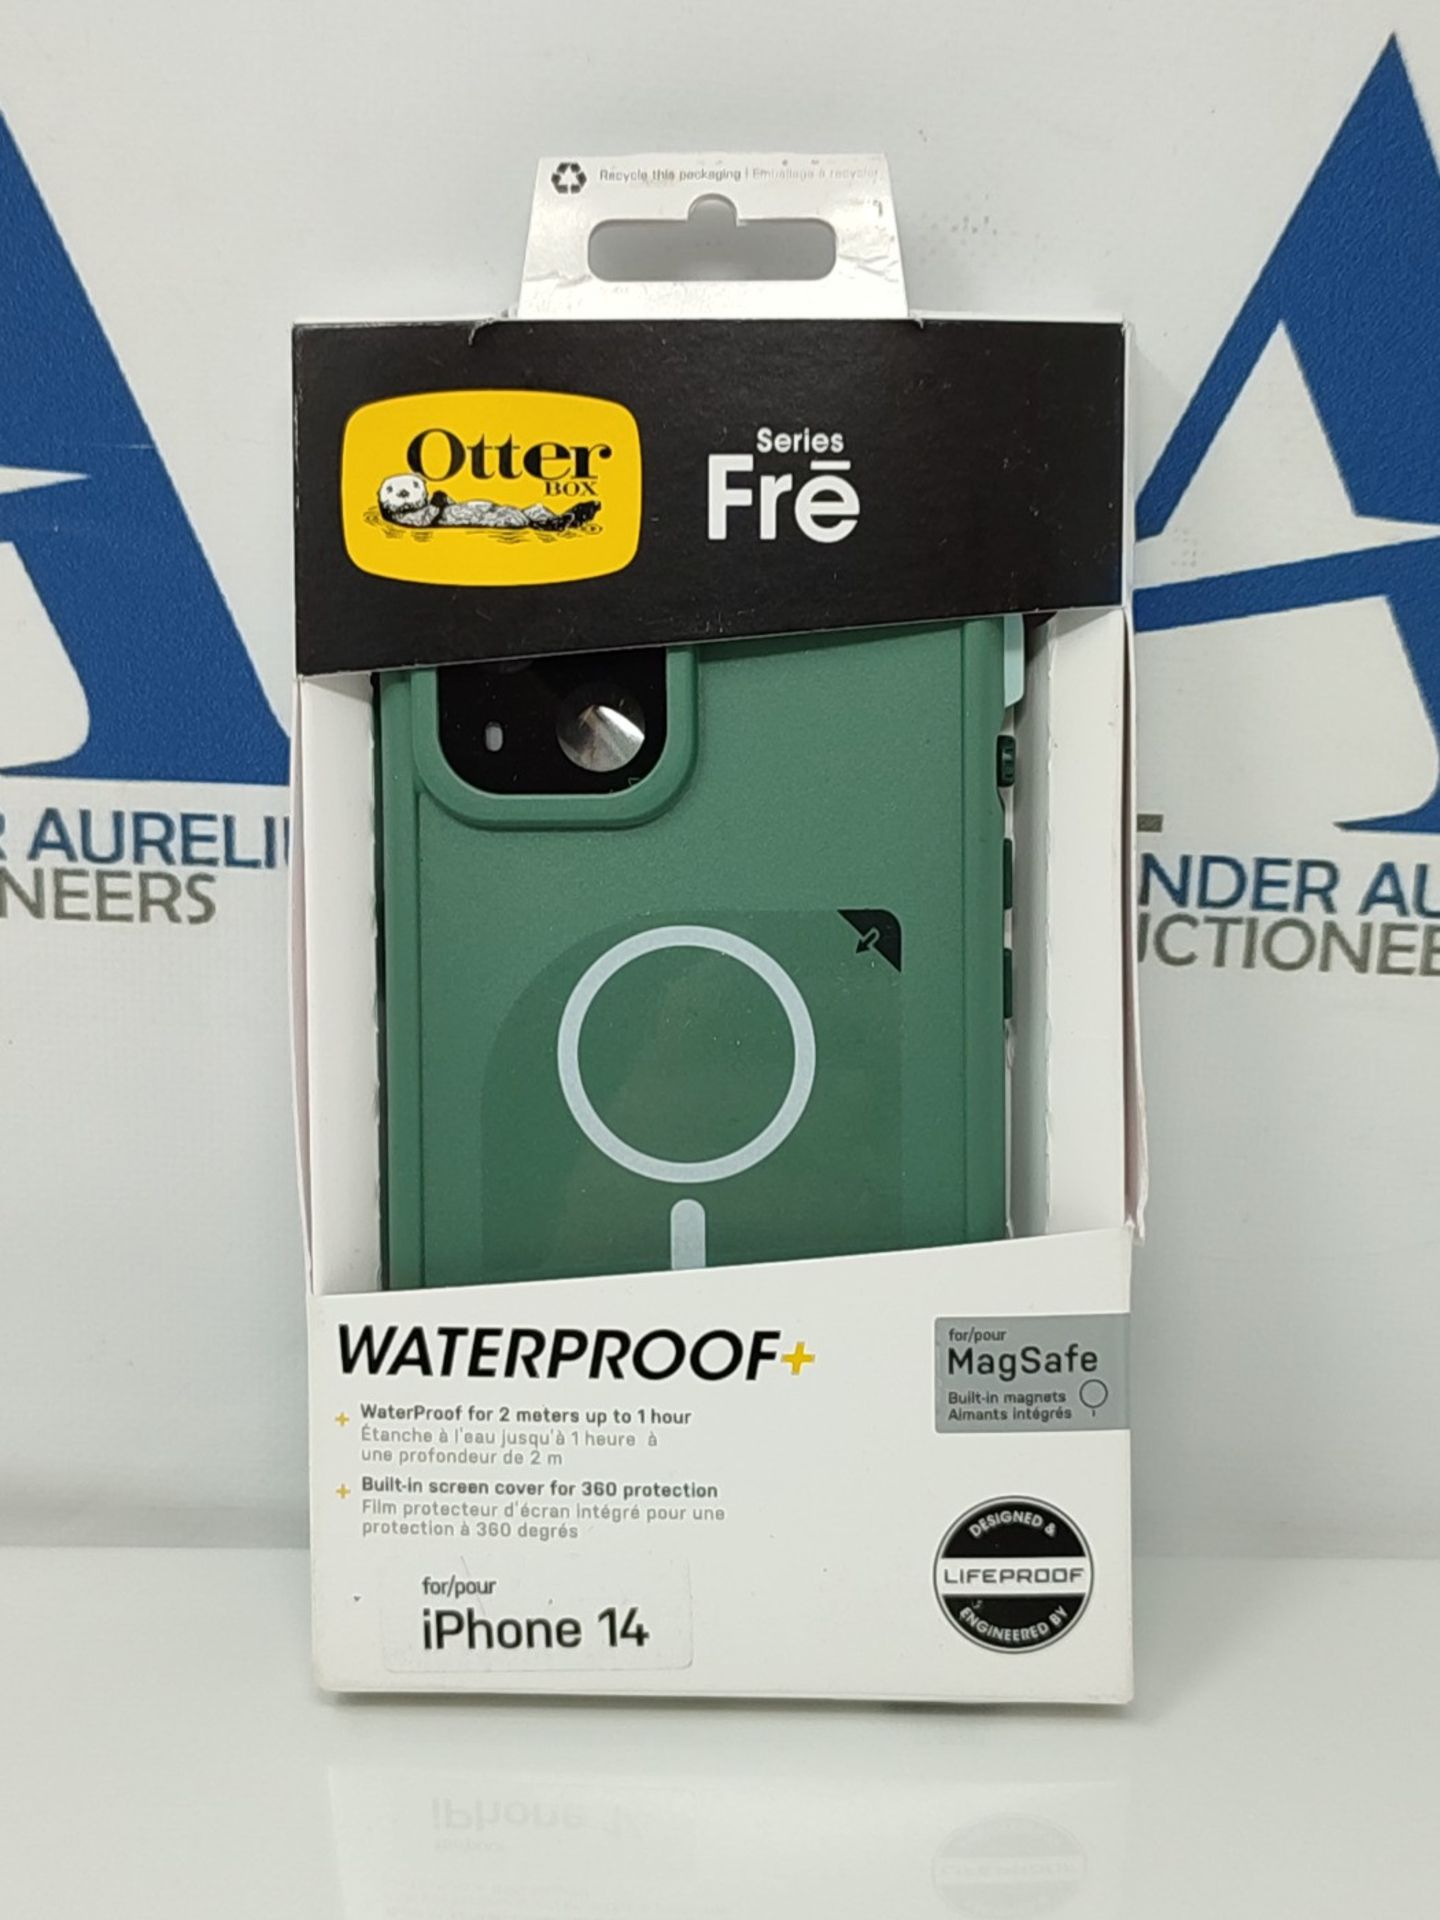 RRP £79.00 OtterBox Fre Case for iPhone 14 for MagSafe, Waterproof (IP68), Shockproof, Dirtproof, - Bild 2 aus 3